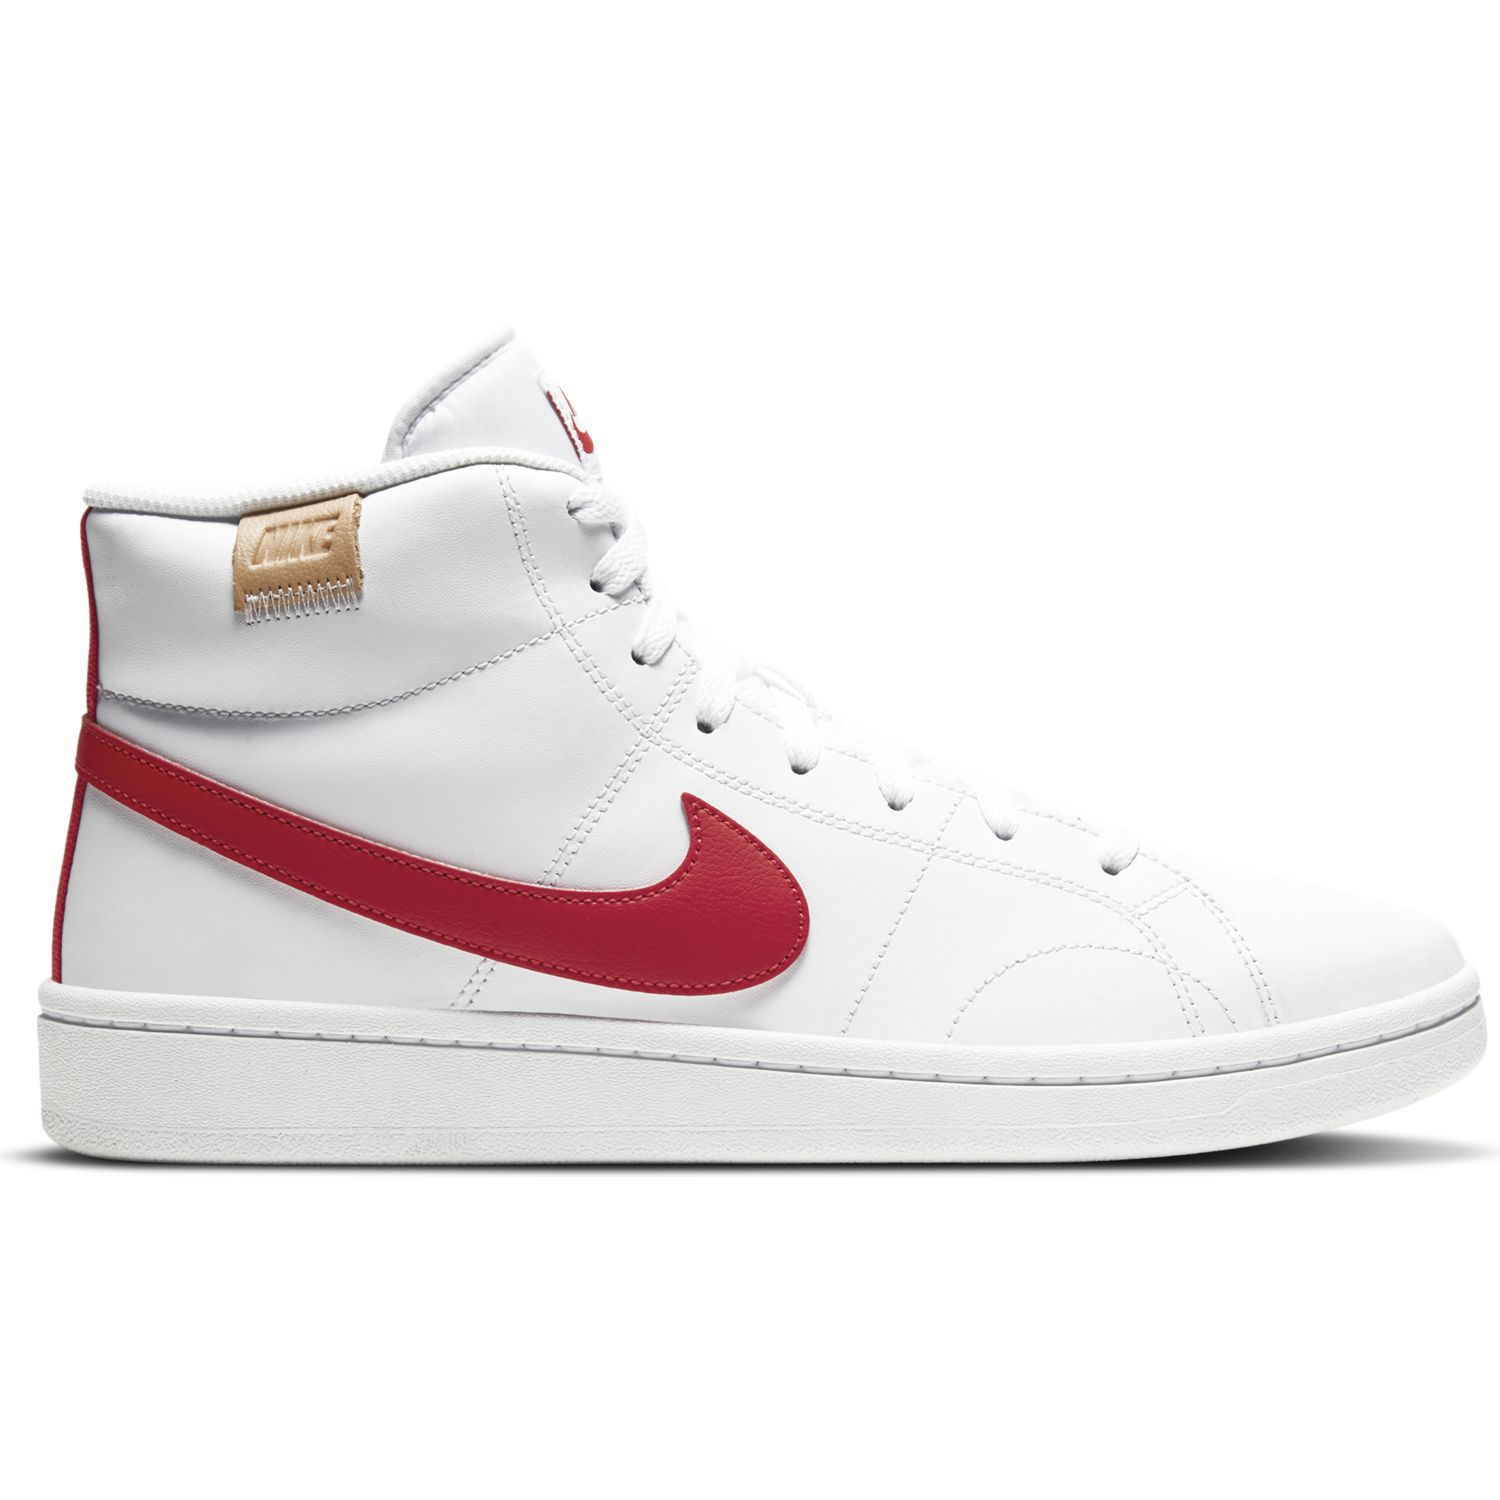 nike red high top shoes